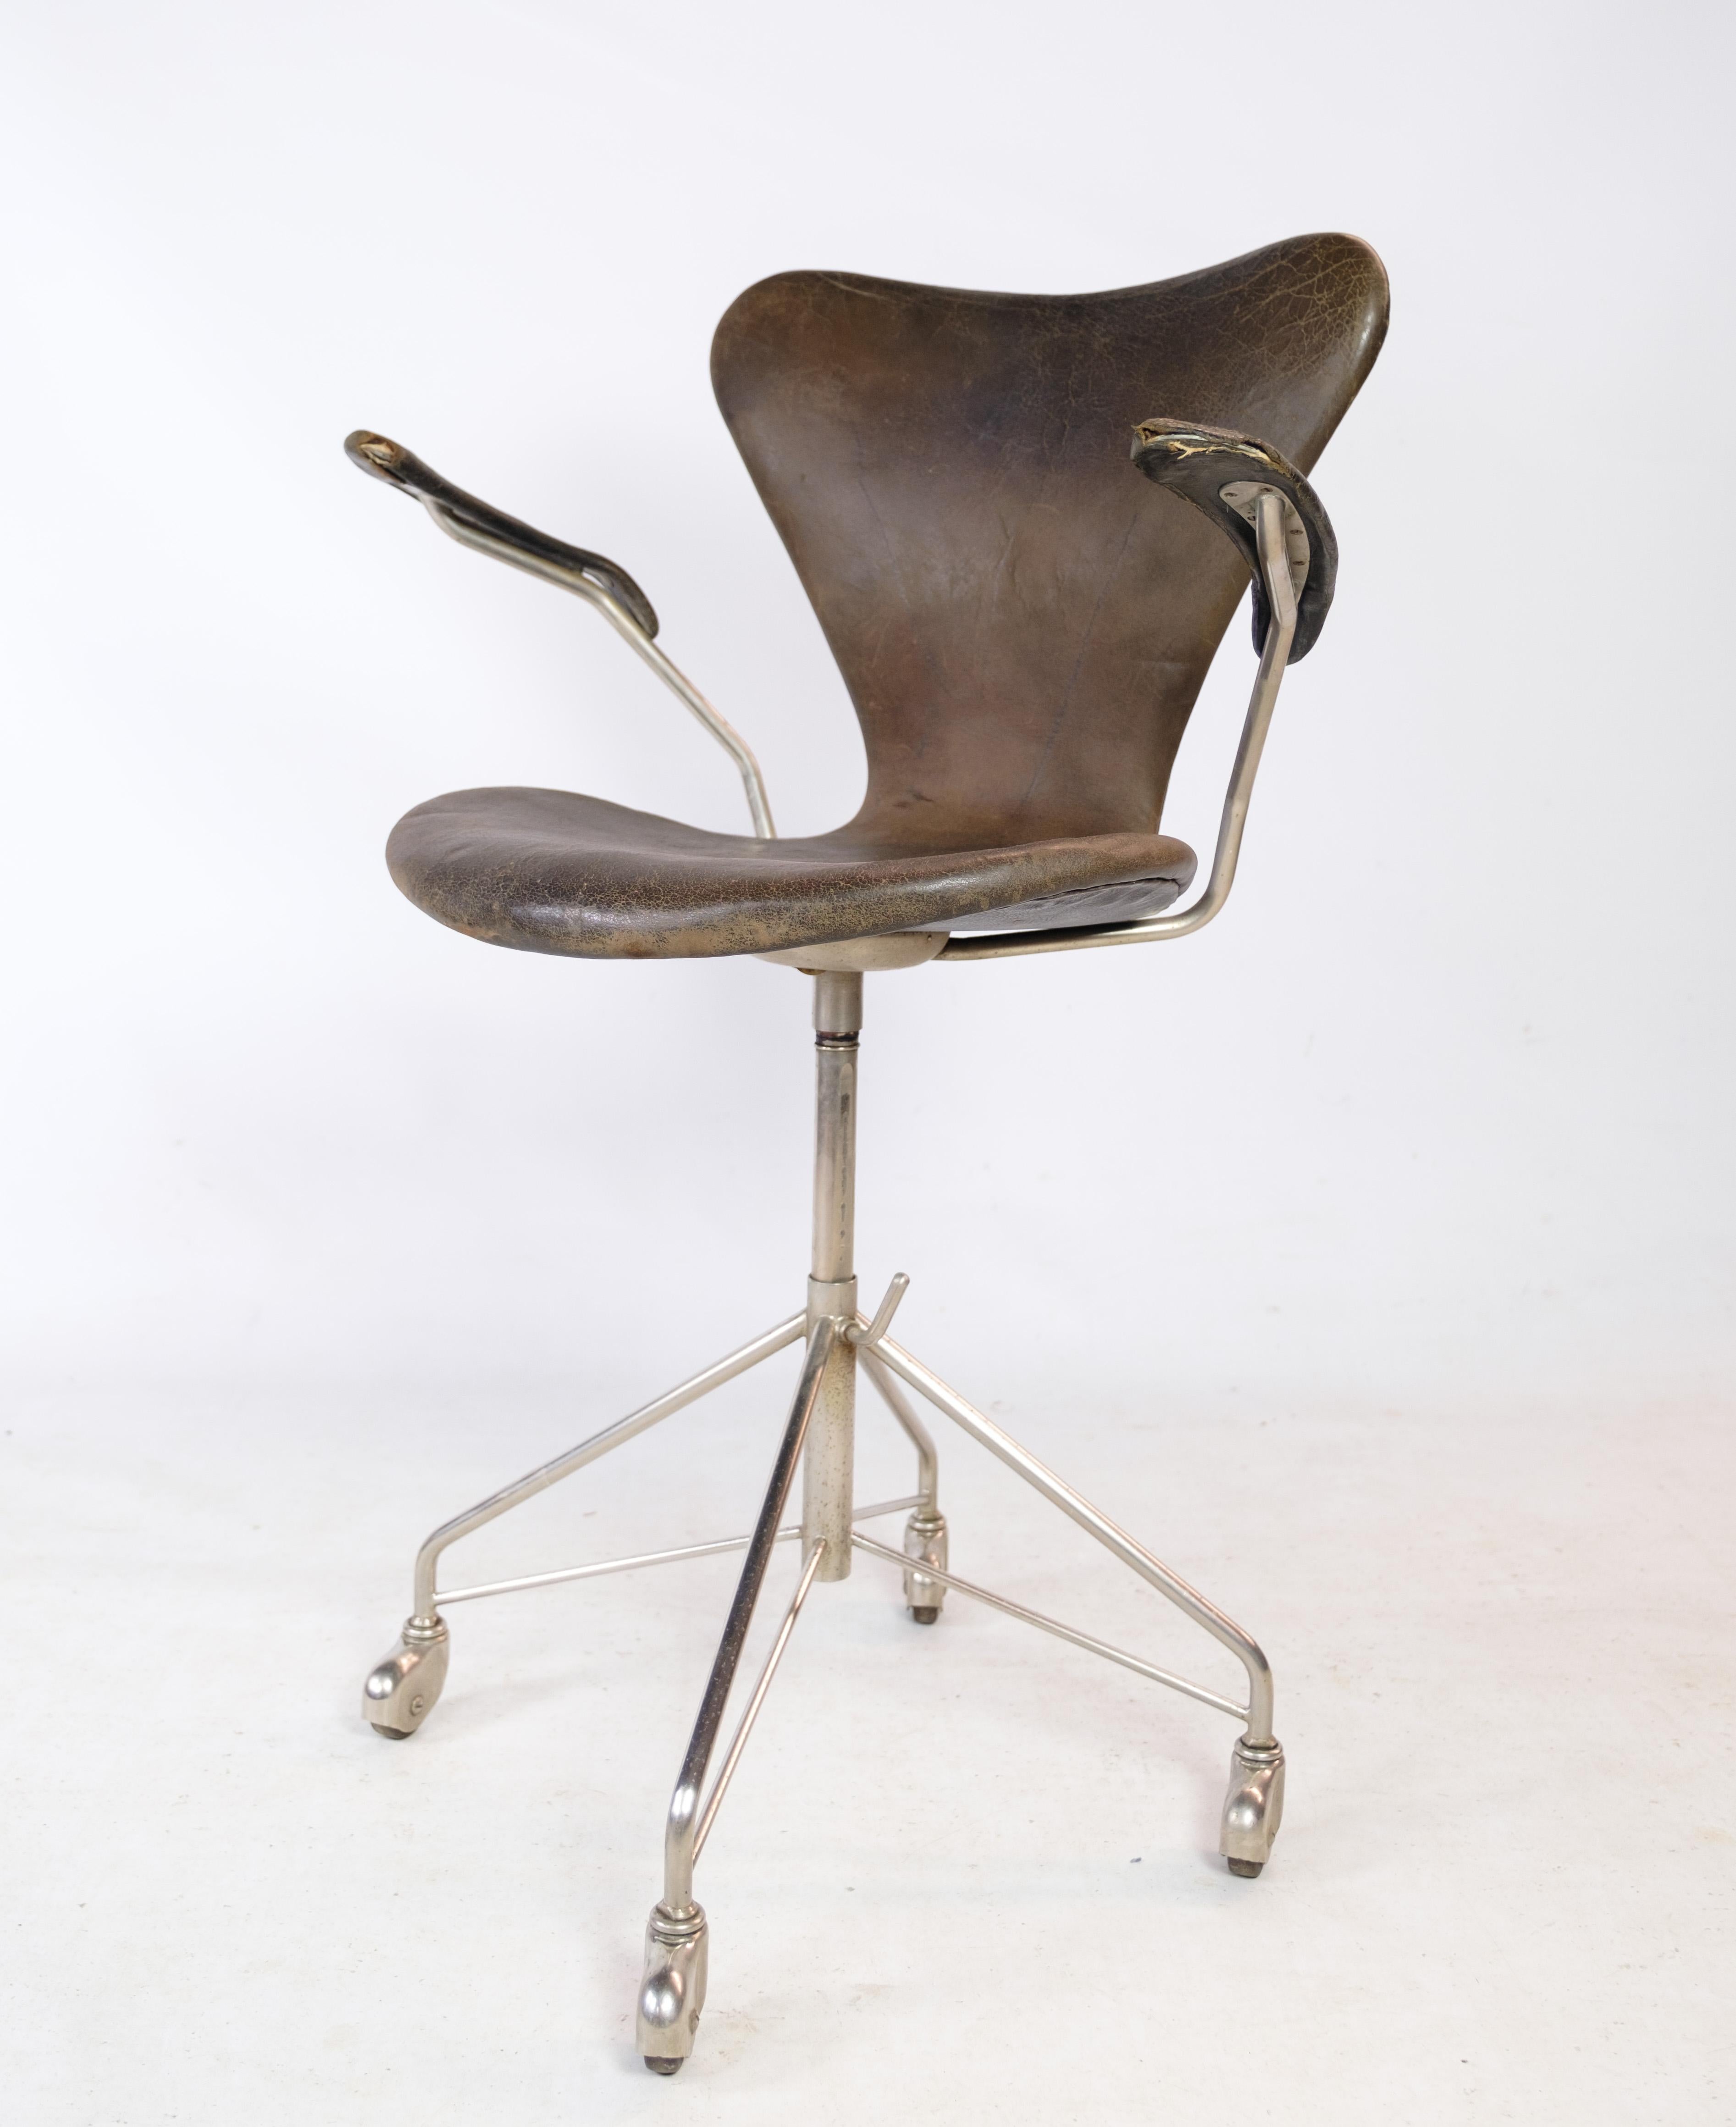 Seven office chair, model 3217, with armrests and swivel function in original dark brown leather designed by Arne Jacobsen in the 1950s and manufactured by Fritz Hansen. The chair is in used condition with patina and wear. Comes with original